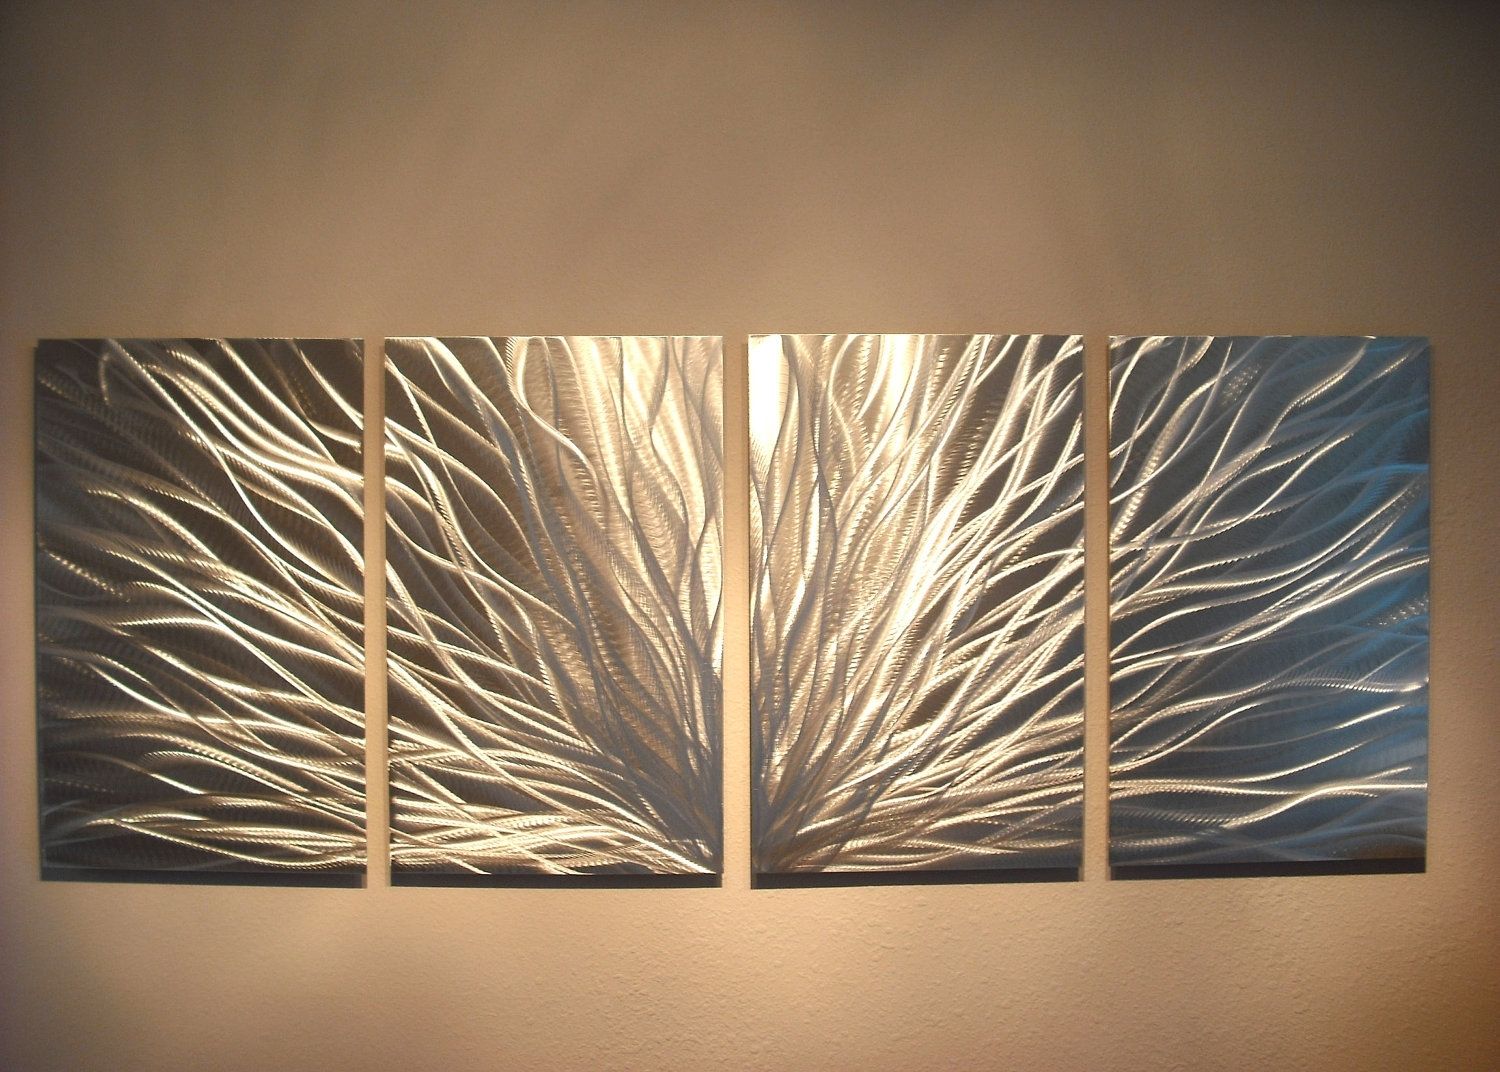 Radiance – Abstract Metal Wall Art Contemporary Modern Decor Throughout Contemporary Metal Wall Art (View 3 of 20)